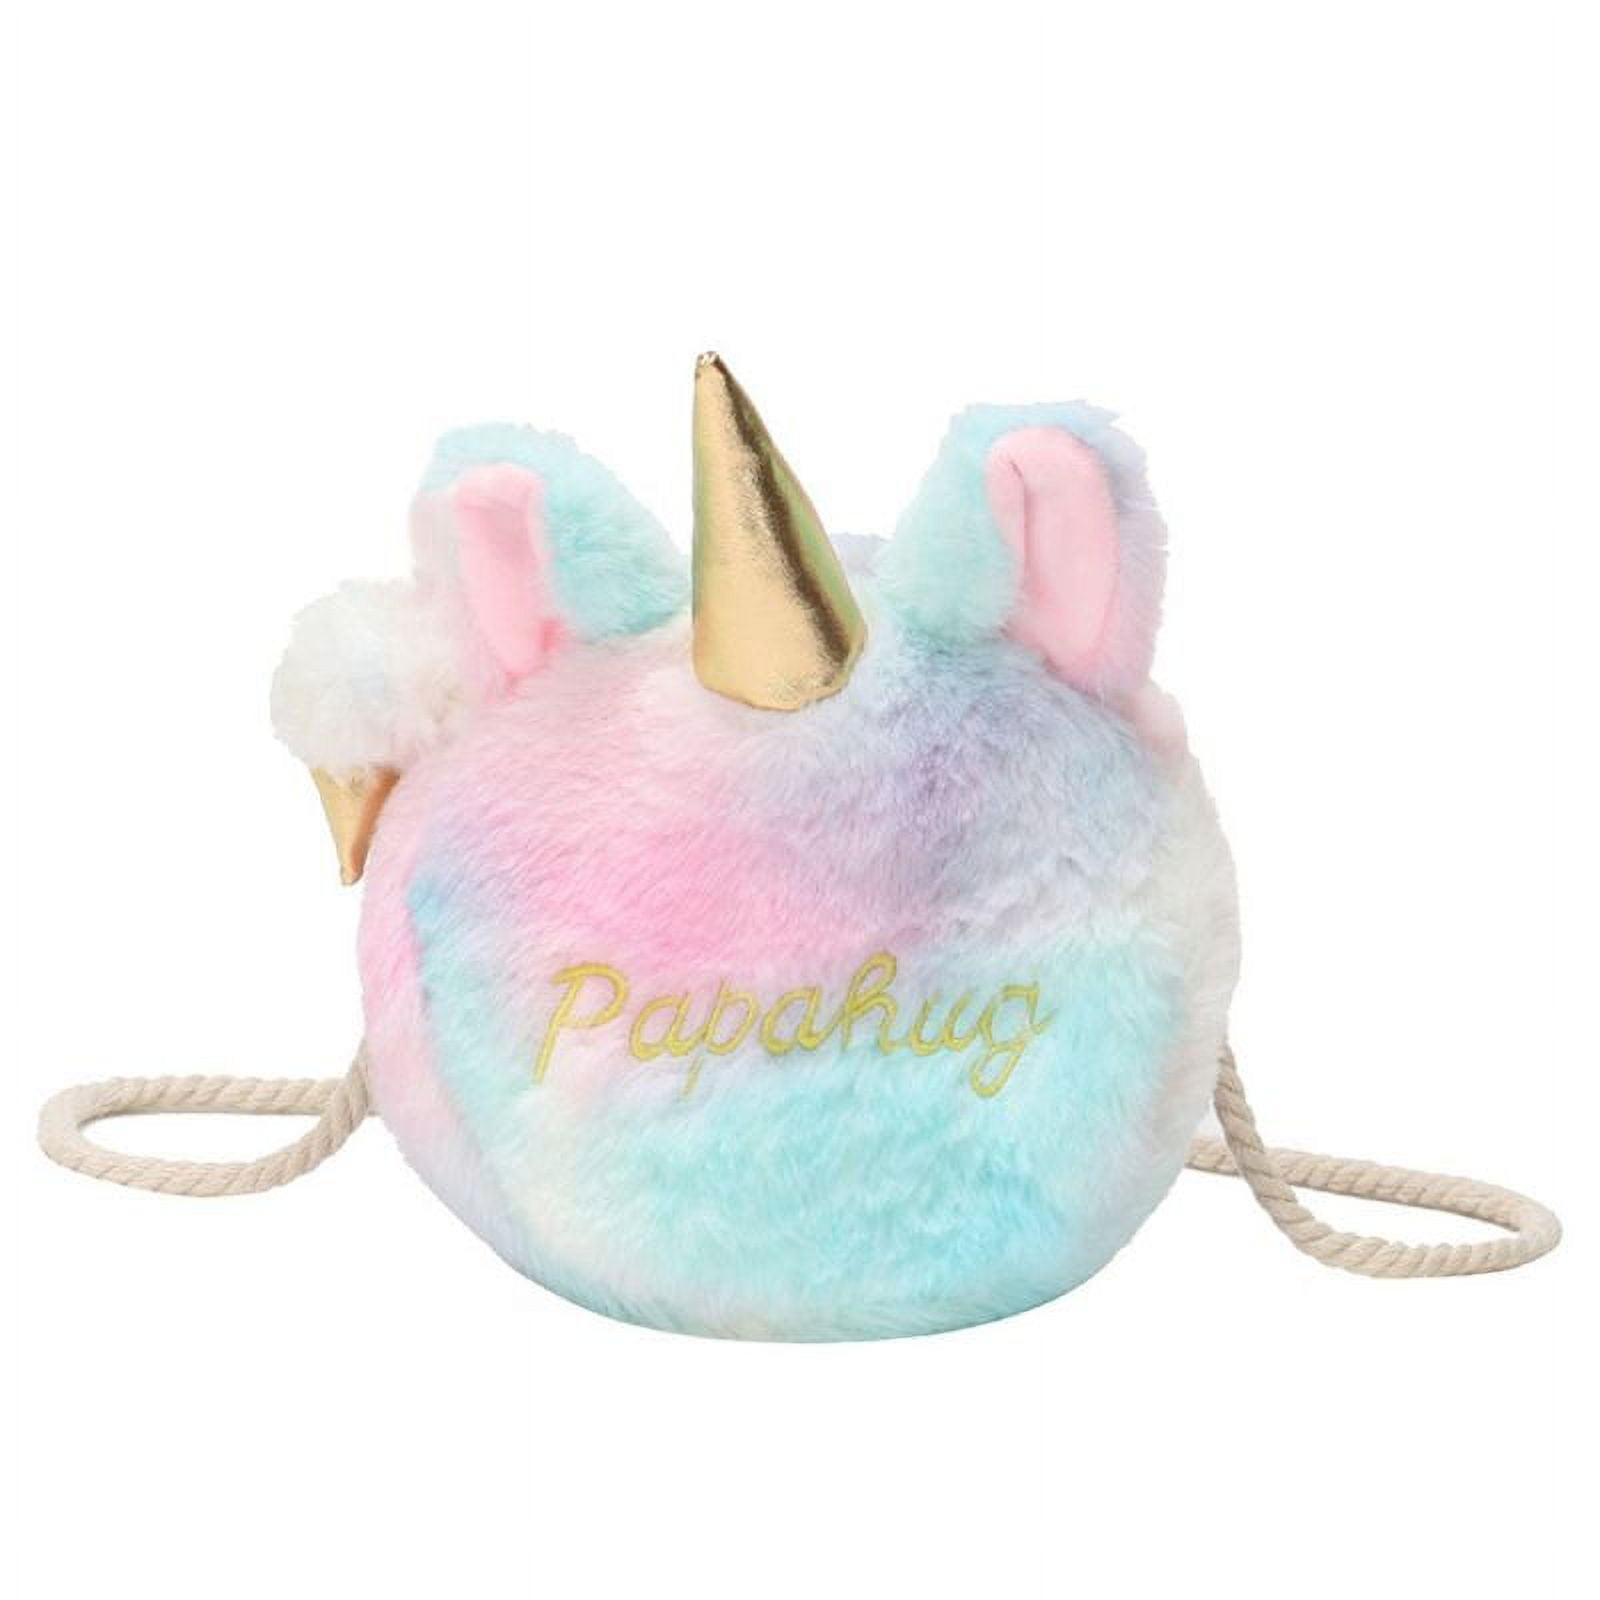  Kids Girls Colorful Plush Unicorn Cell Phone Bag Pouch